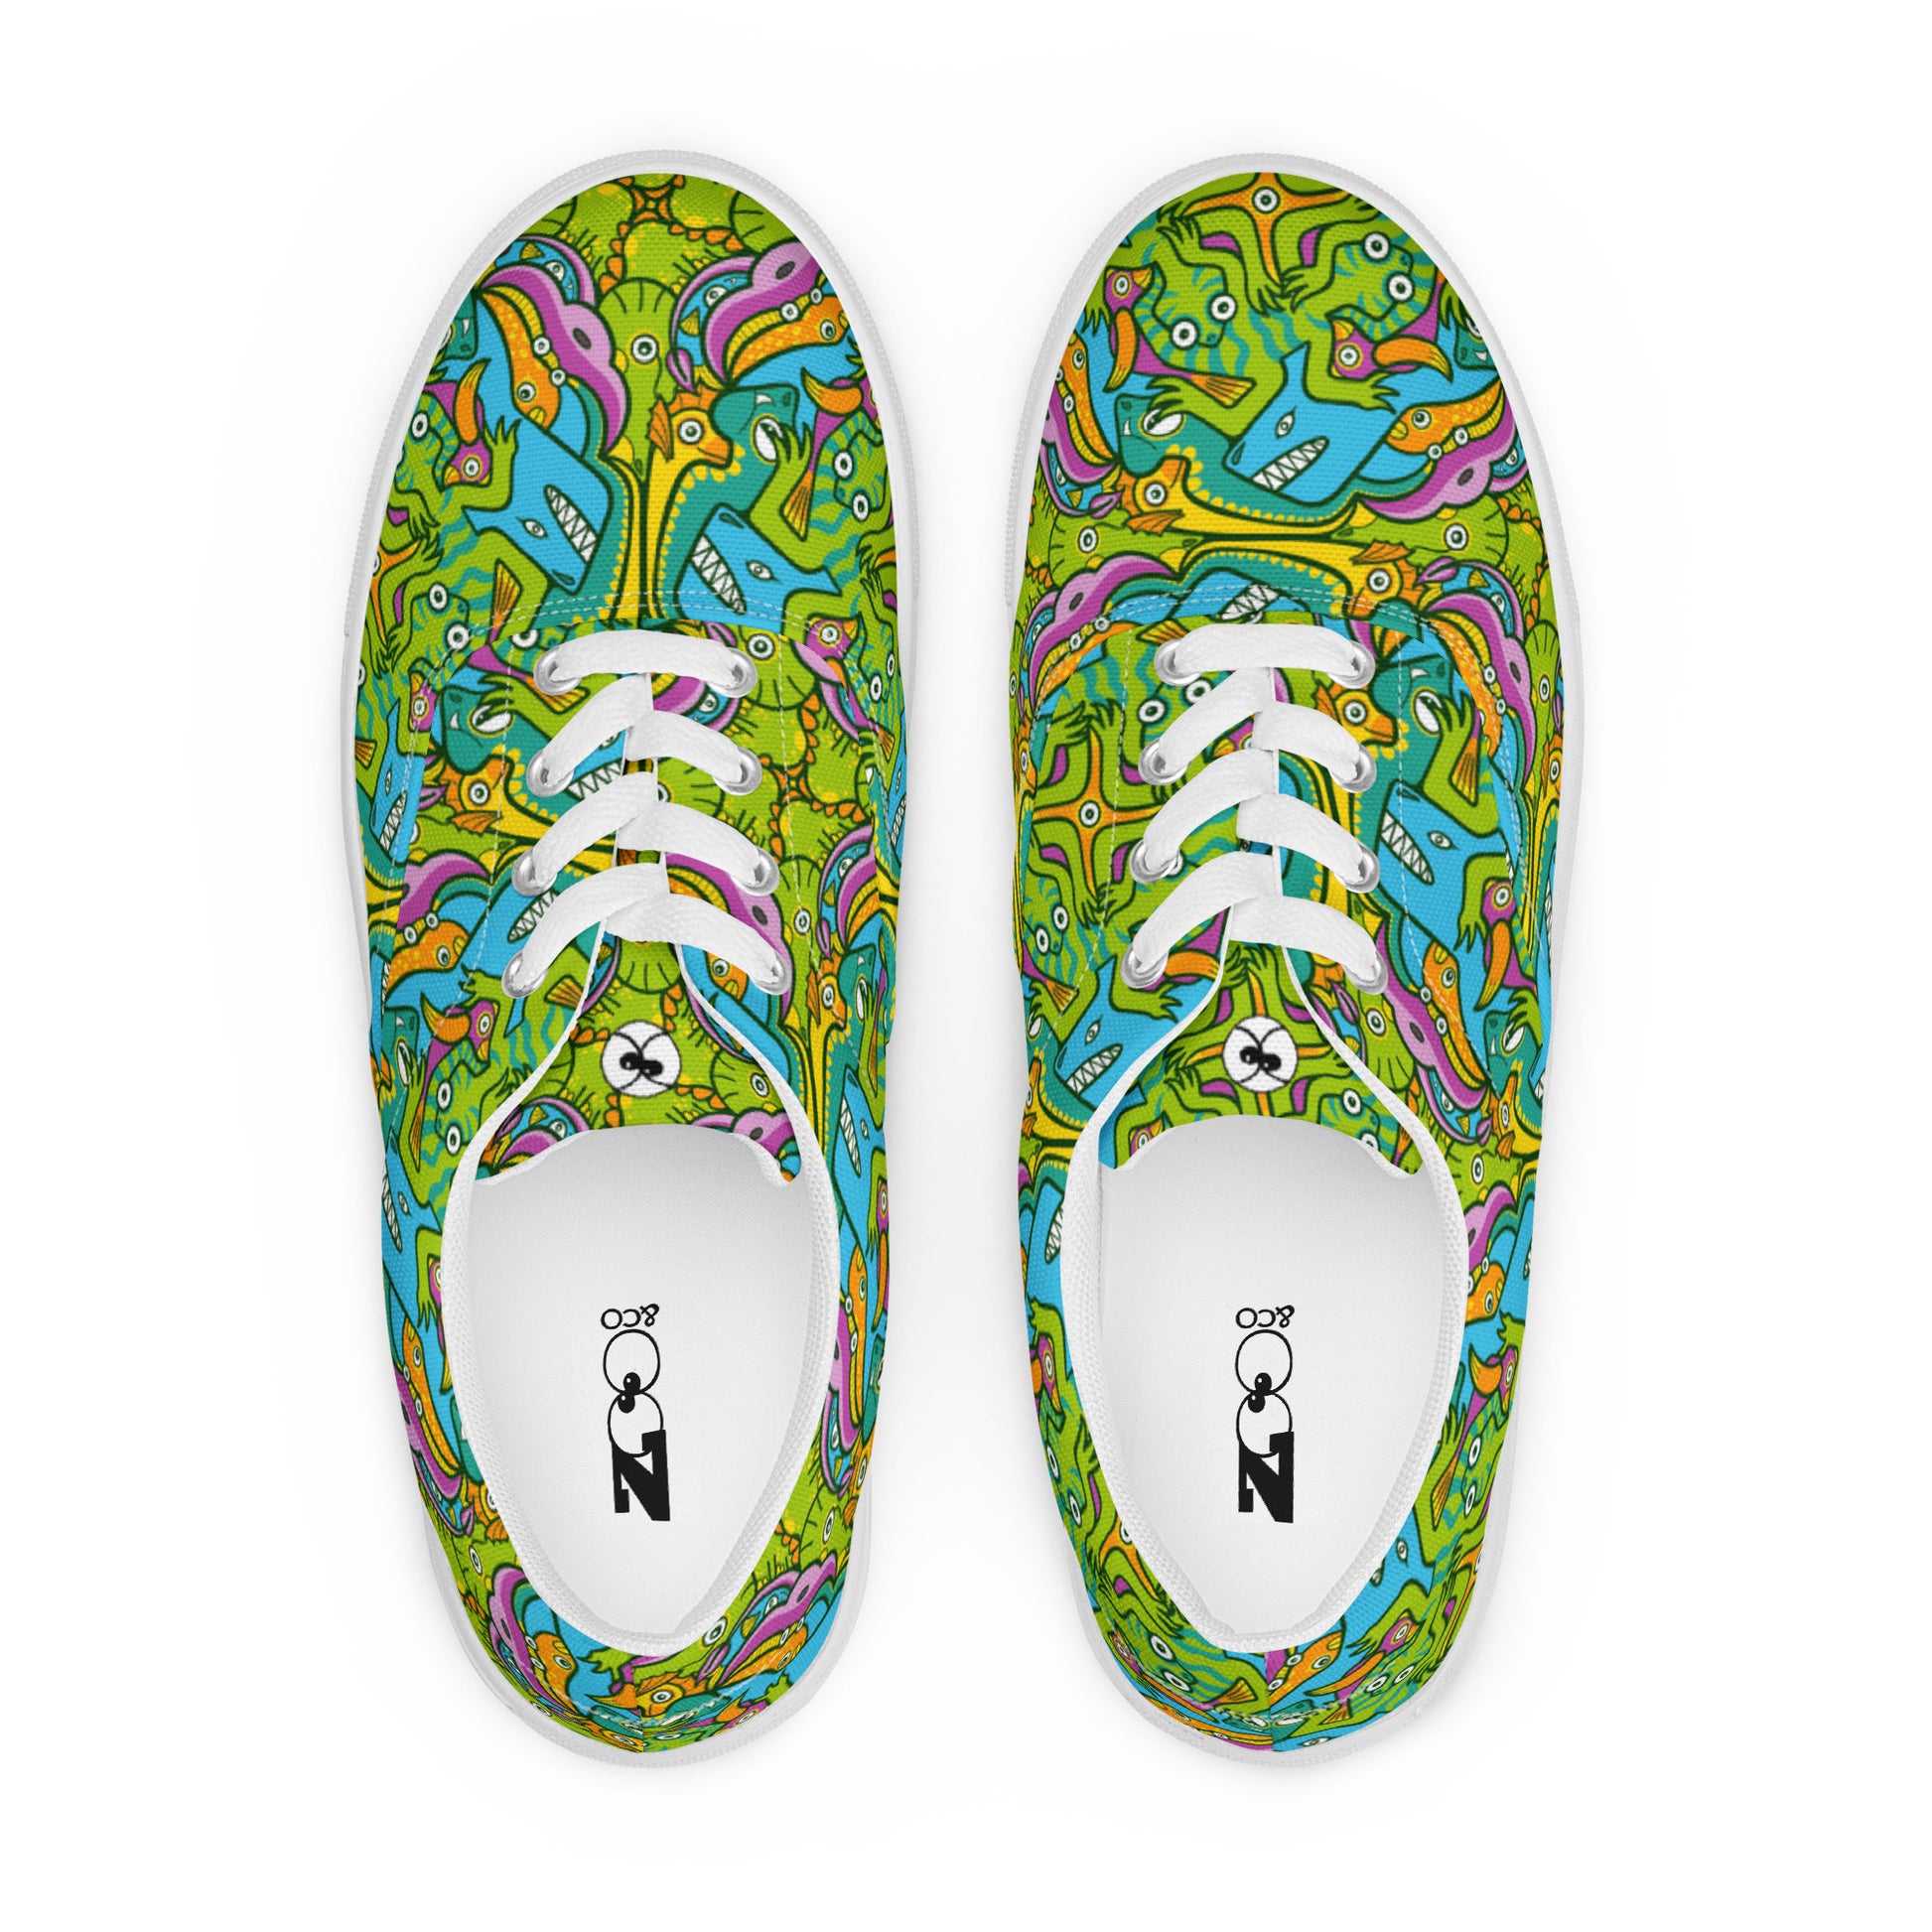 To keep calm and doodle is more than just doodling Men’s lace-up canvas shoes. Top view